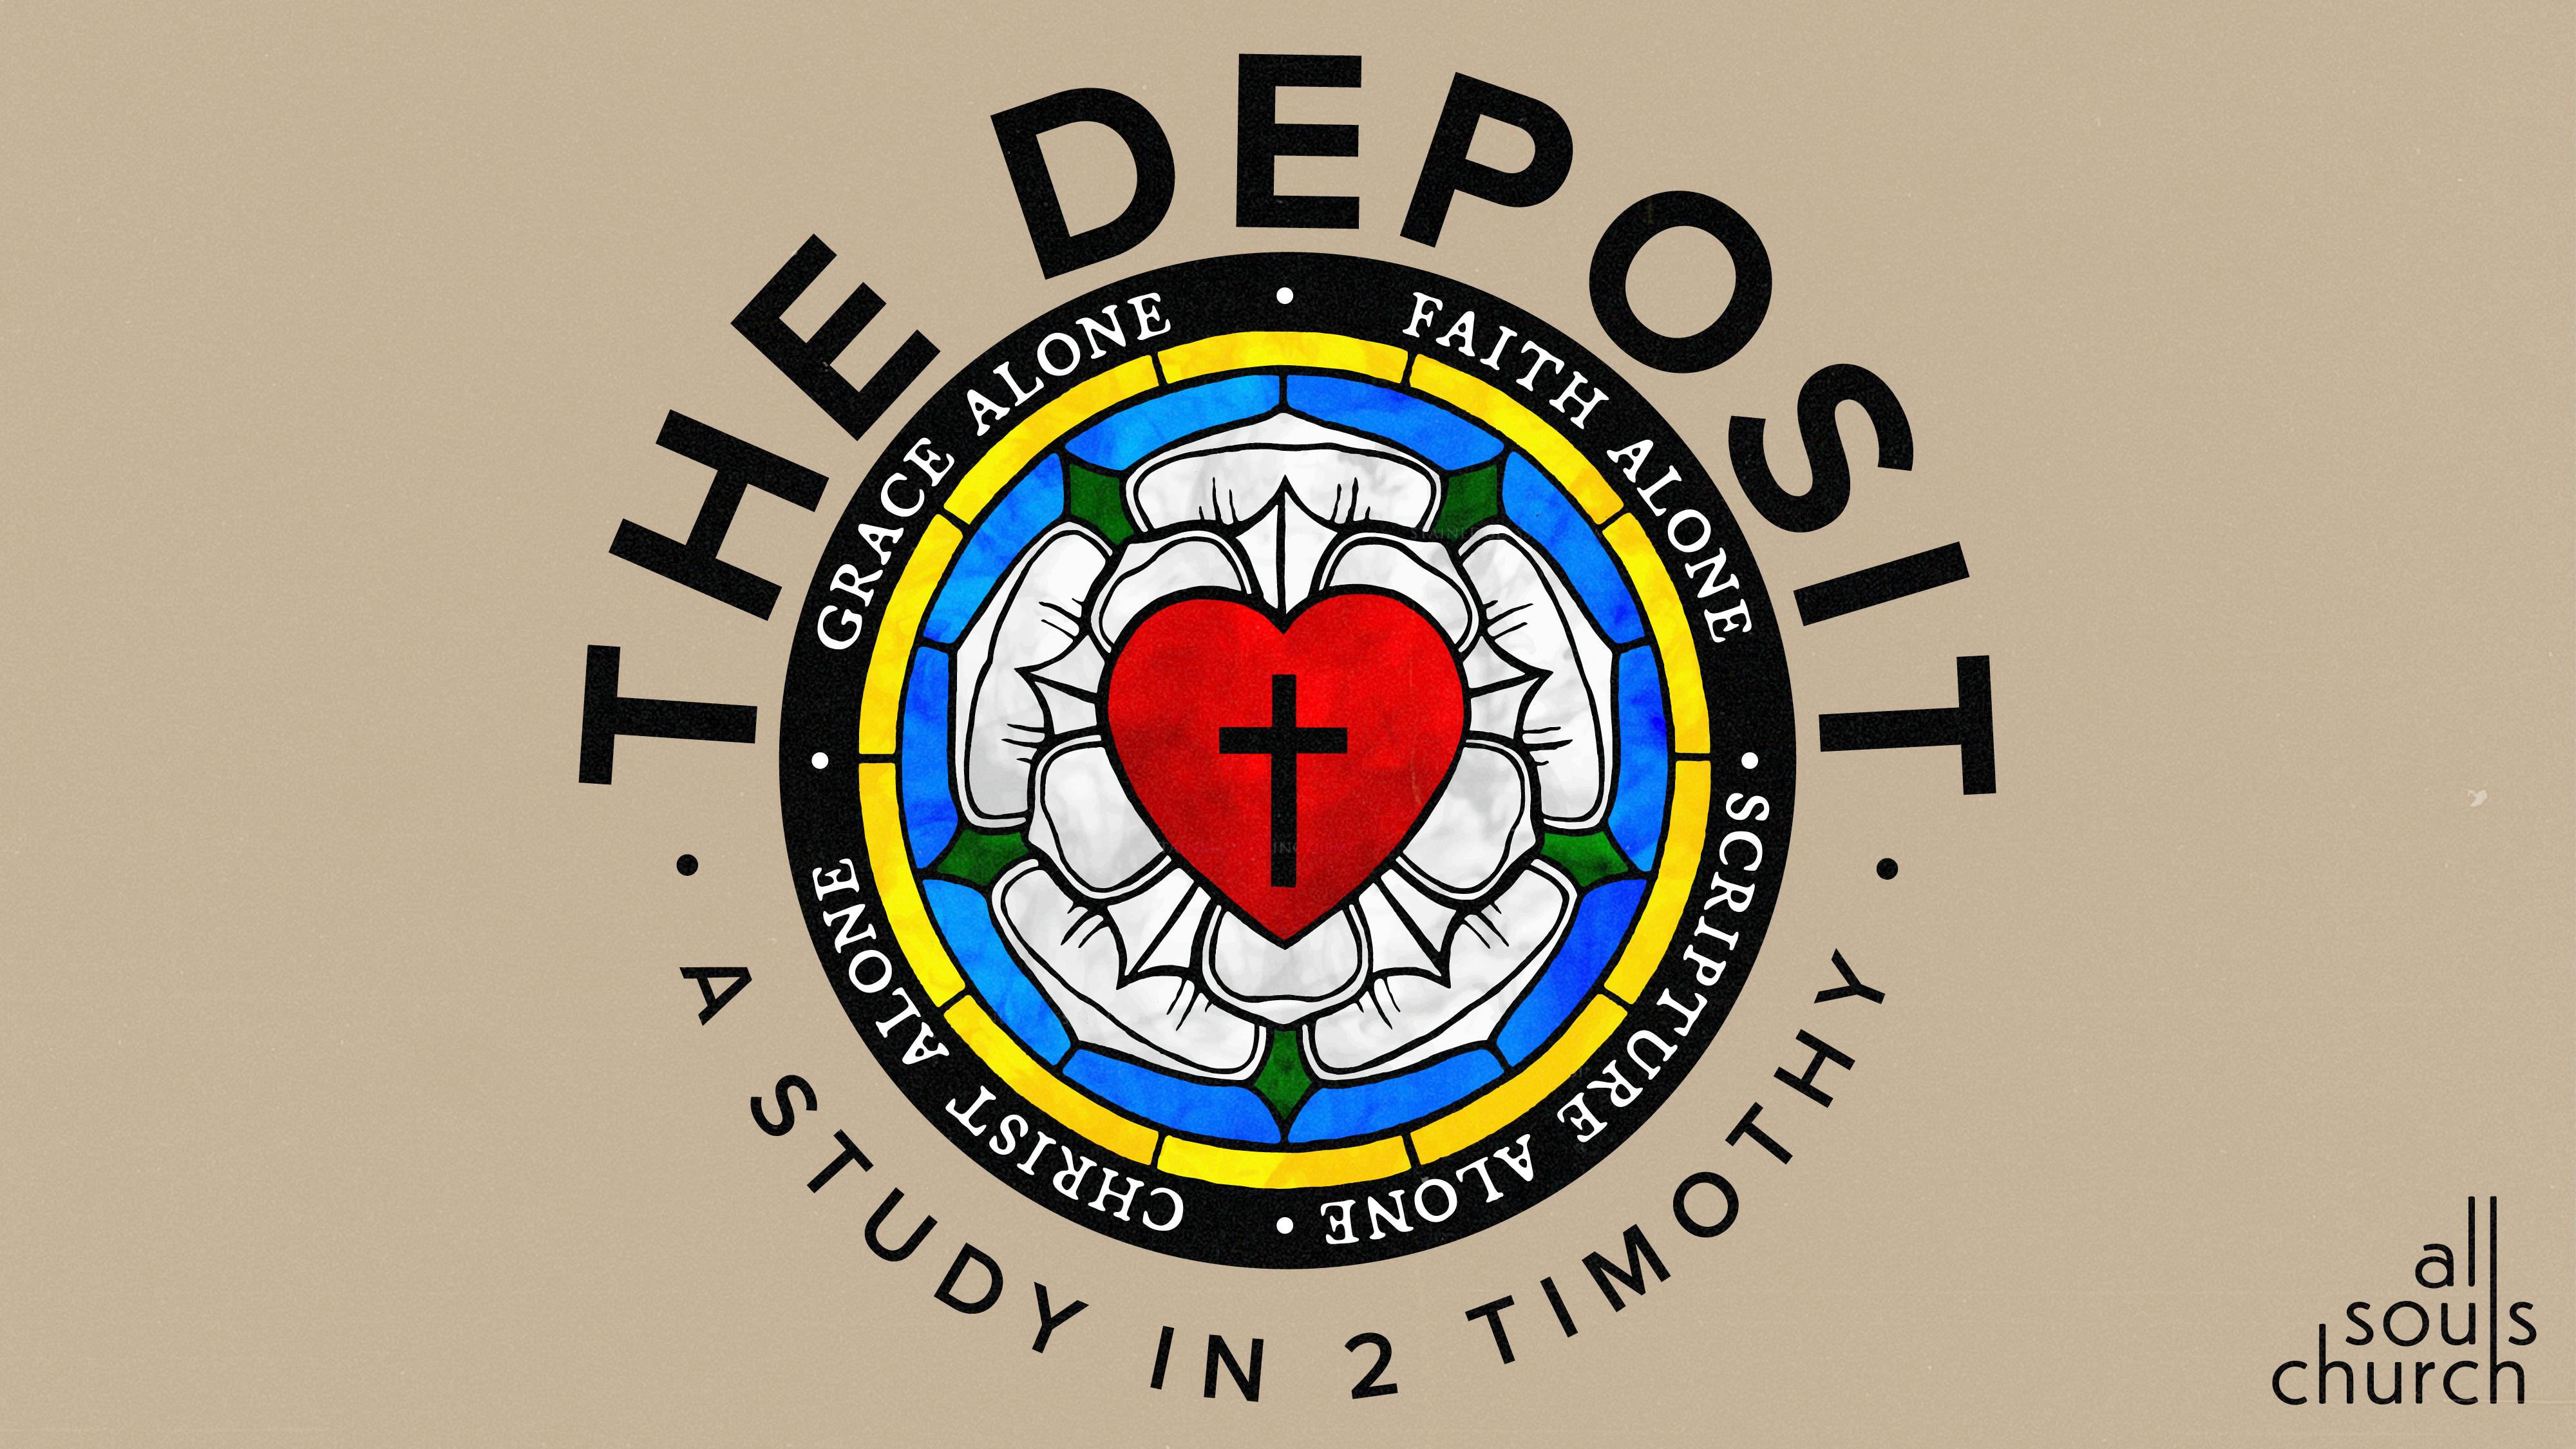 2 Timothy - The Deposit: Useful to the Master cover for post